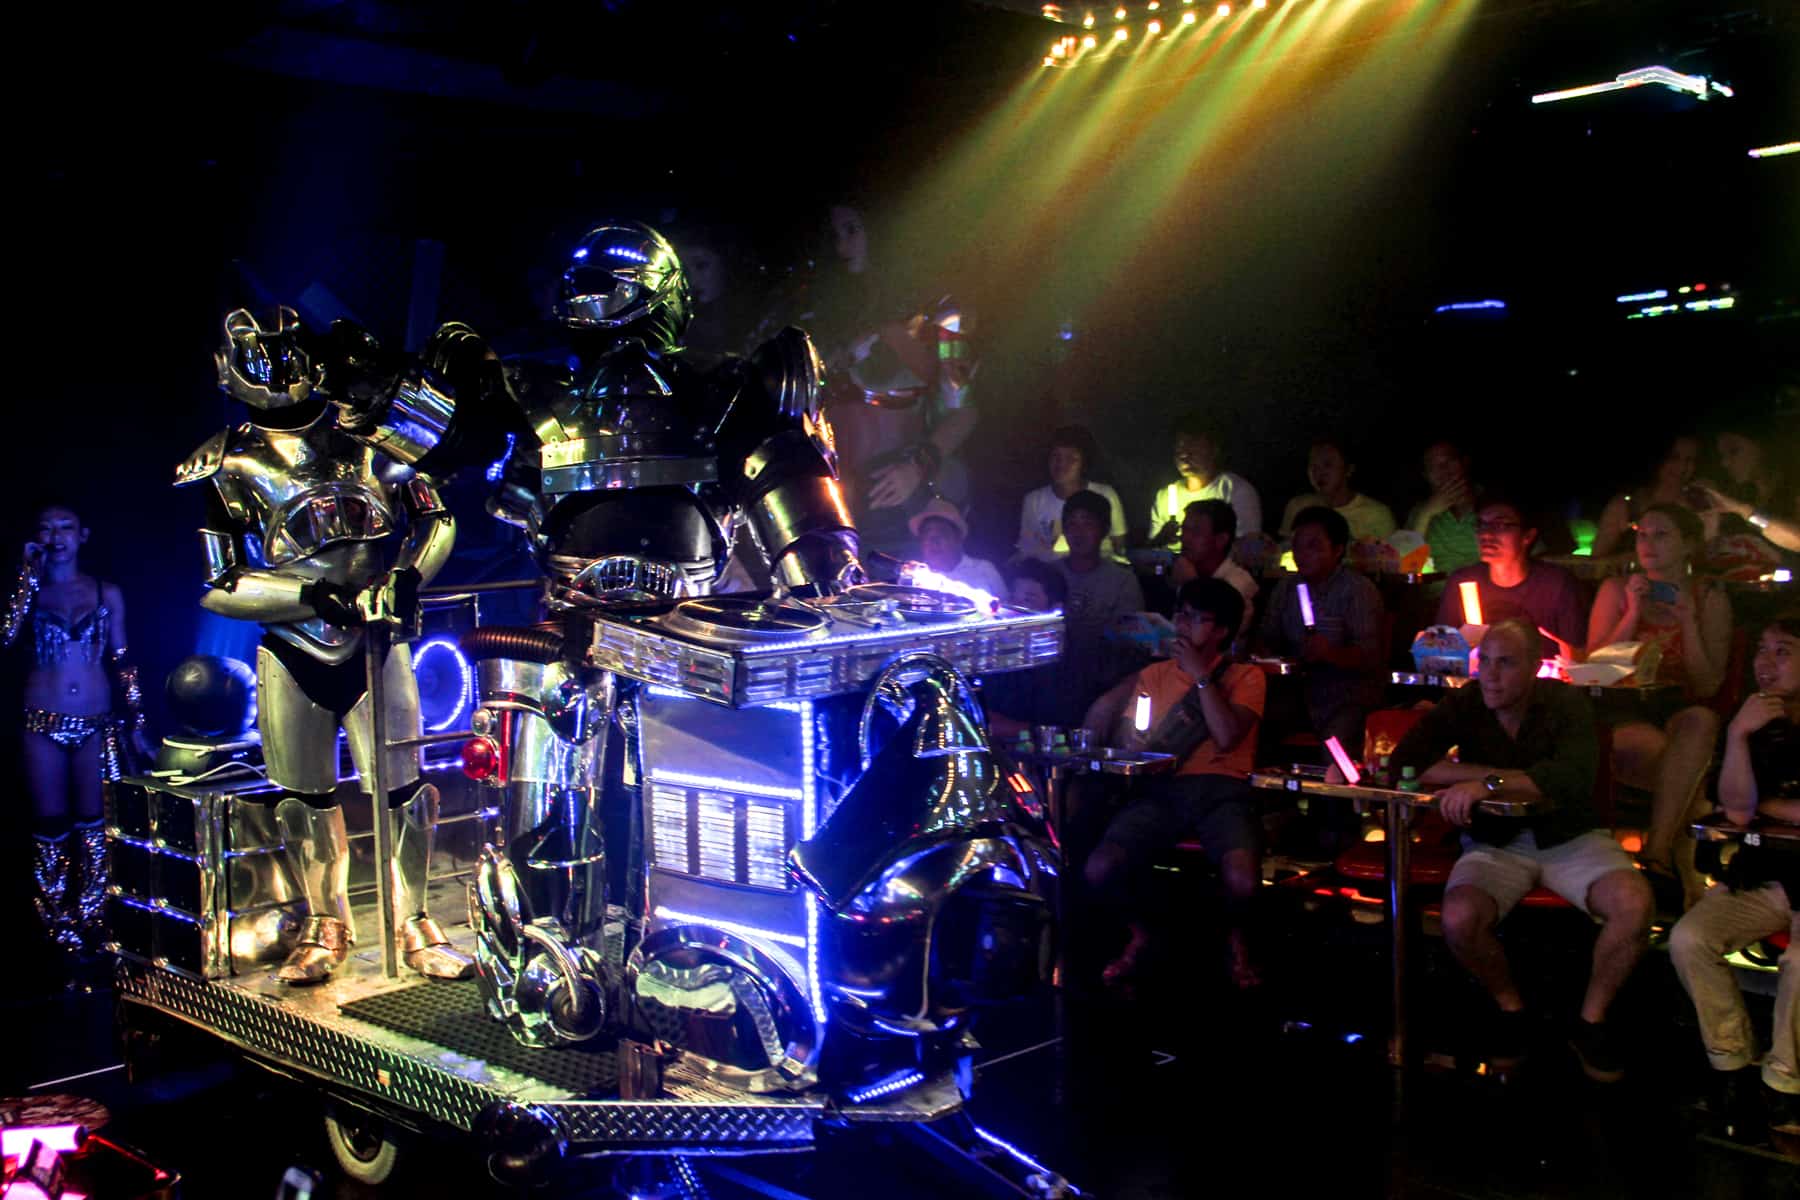 Two robots ride on a cart past the audience at the Shinjuko robot show in Tokyo. 